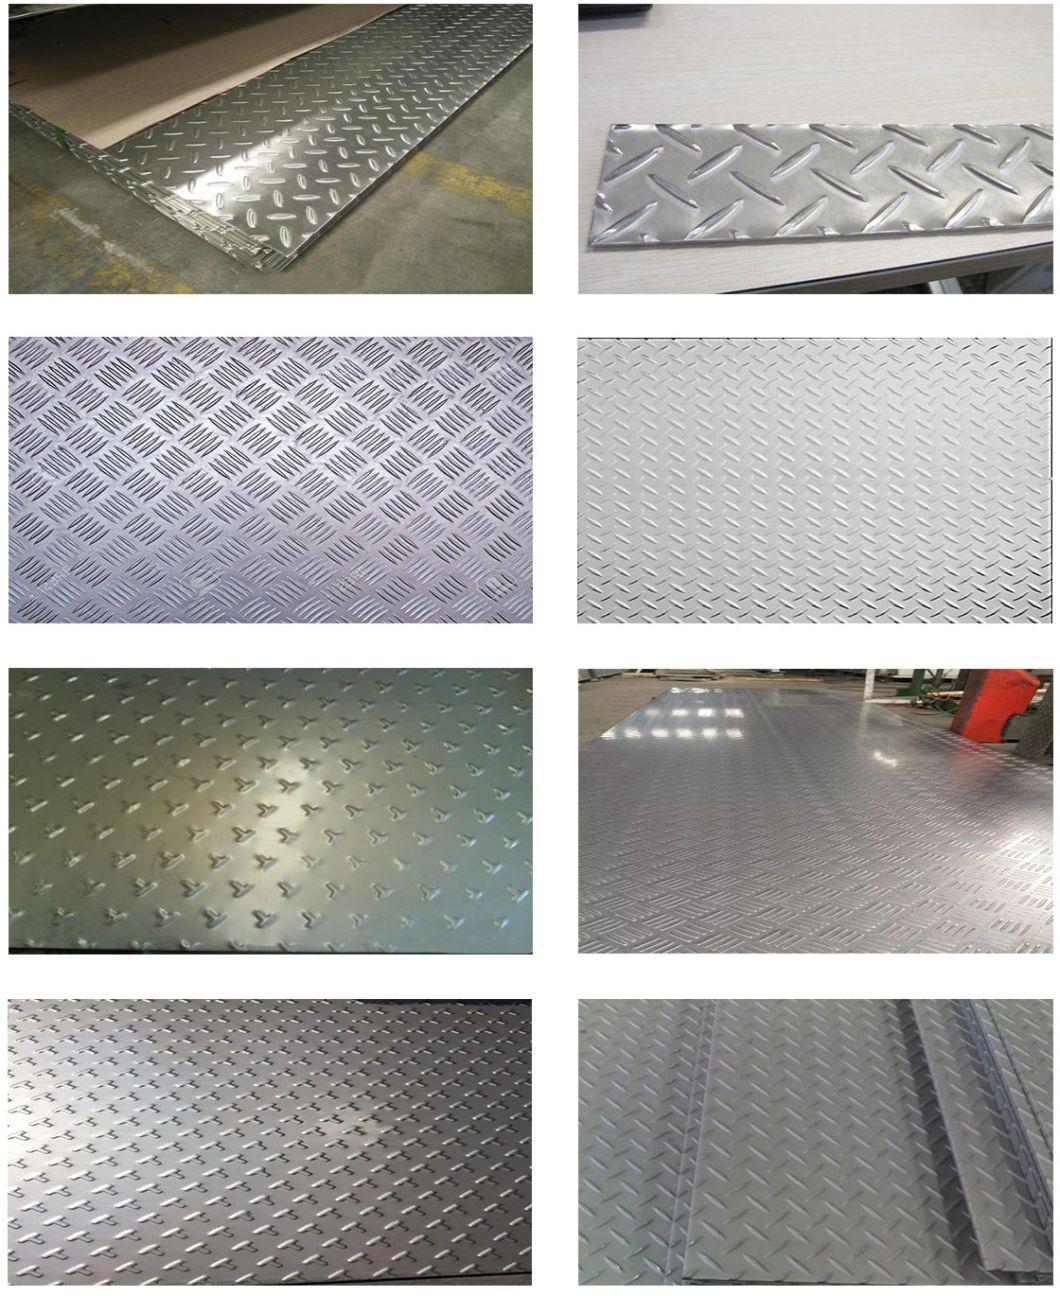 Good Price Stainless Steel Checkered Sheet of 304 316 304L 316L